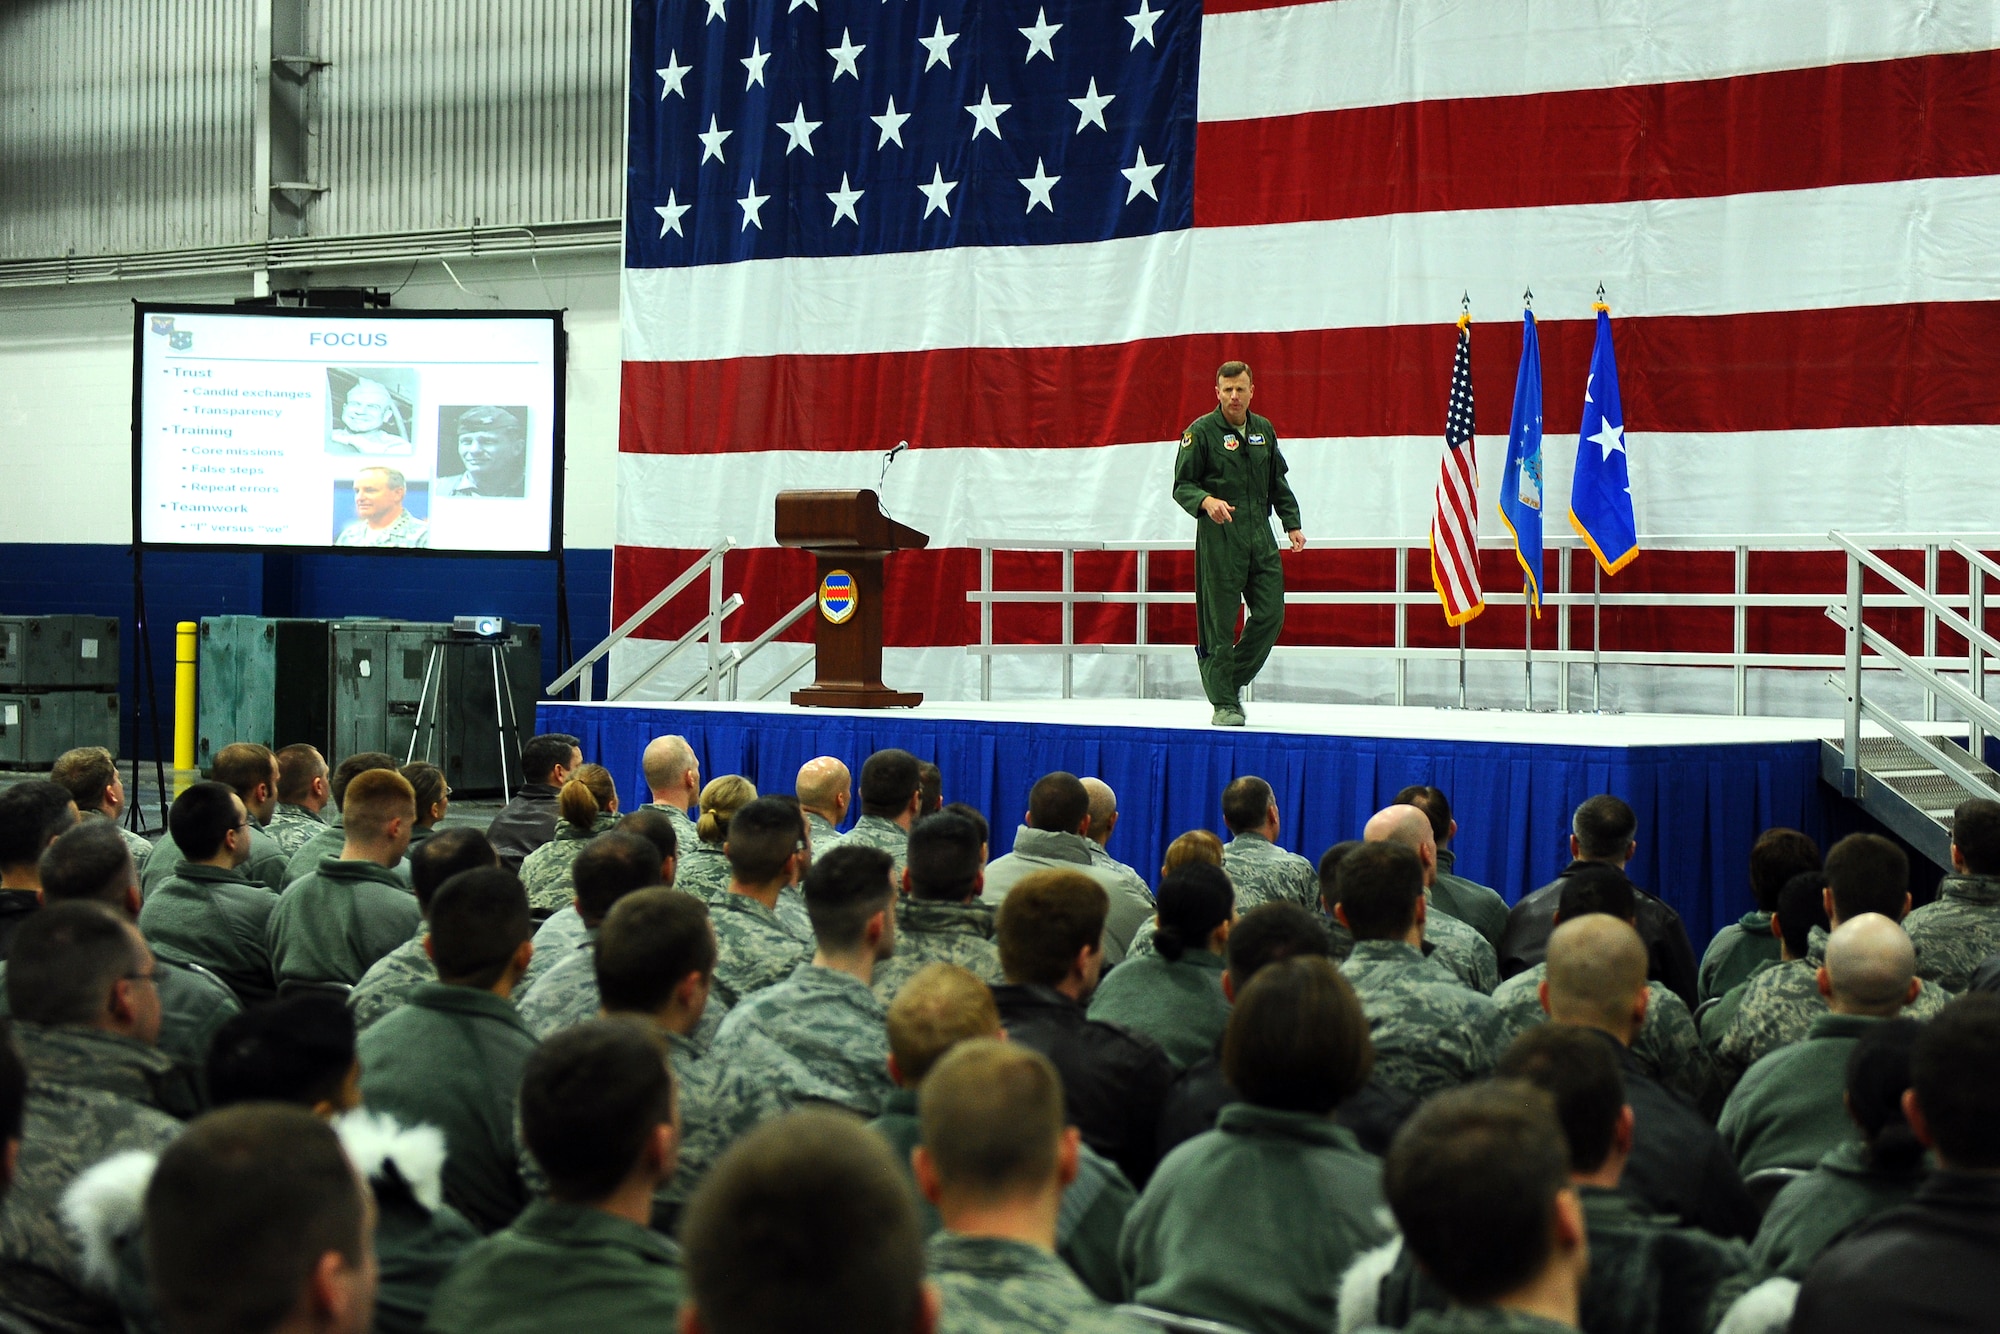 U.S. Air Force Lt. Gen. Tod D. Wolters, 12th Air Force (AFSOUTH) commander, speaks to Airmen inside of Dock 1 of the Bennie Davis Maintenance facility on Jan. 9 at Offutt Air Force Base, Neb.  Filled bleachers and floor seats left only standing room for the hundreds of Airmen attending the first visit of the 12th AF commander.  (U.S. Air Force photo by Josh Plueger/Released)